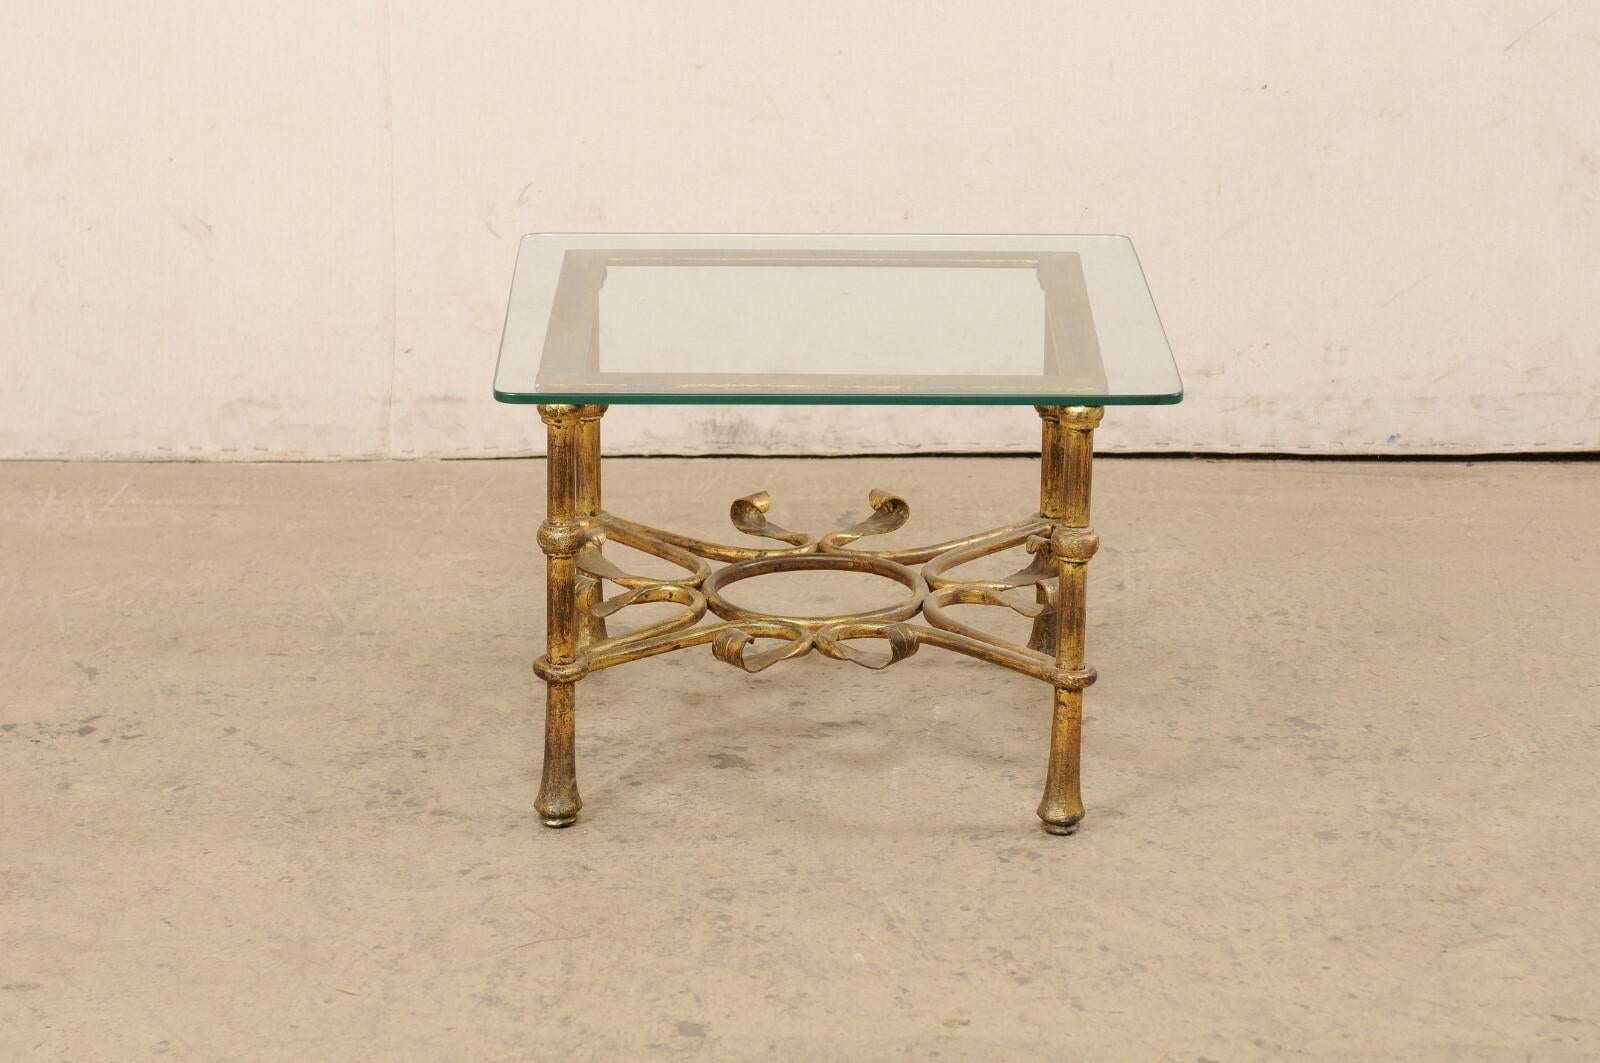 A Spanish small-sized coffee table with glass top from the mid 20th century. This vintage table from Spain features a square-shaped glass top, which is raised upon a metal frame comprised of a square top and four rounded legs at each corner, braced